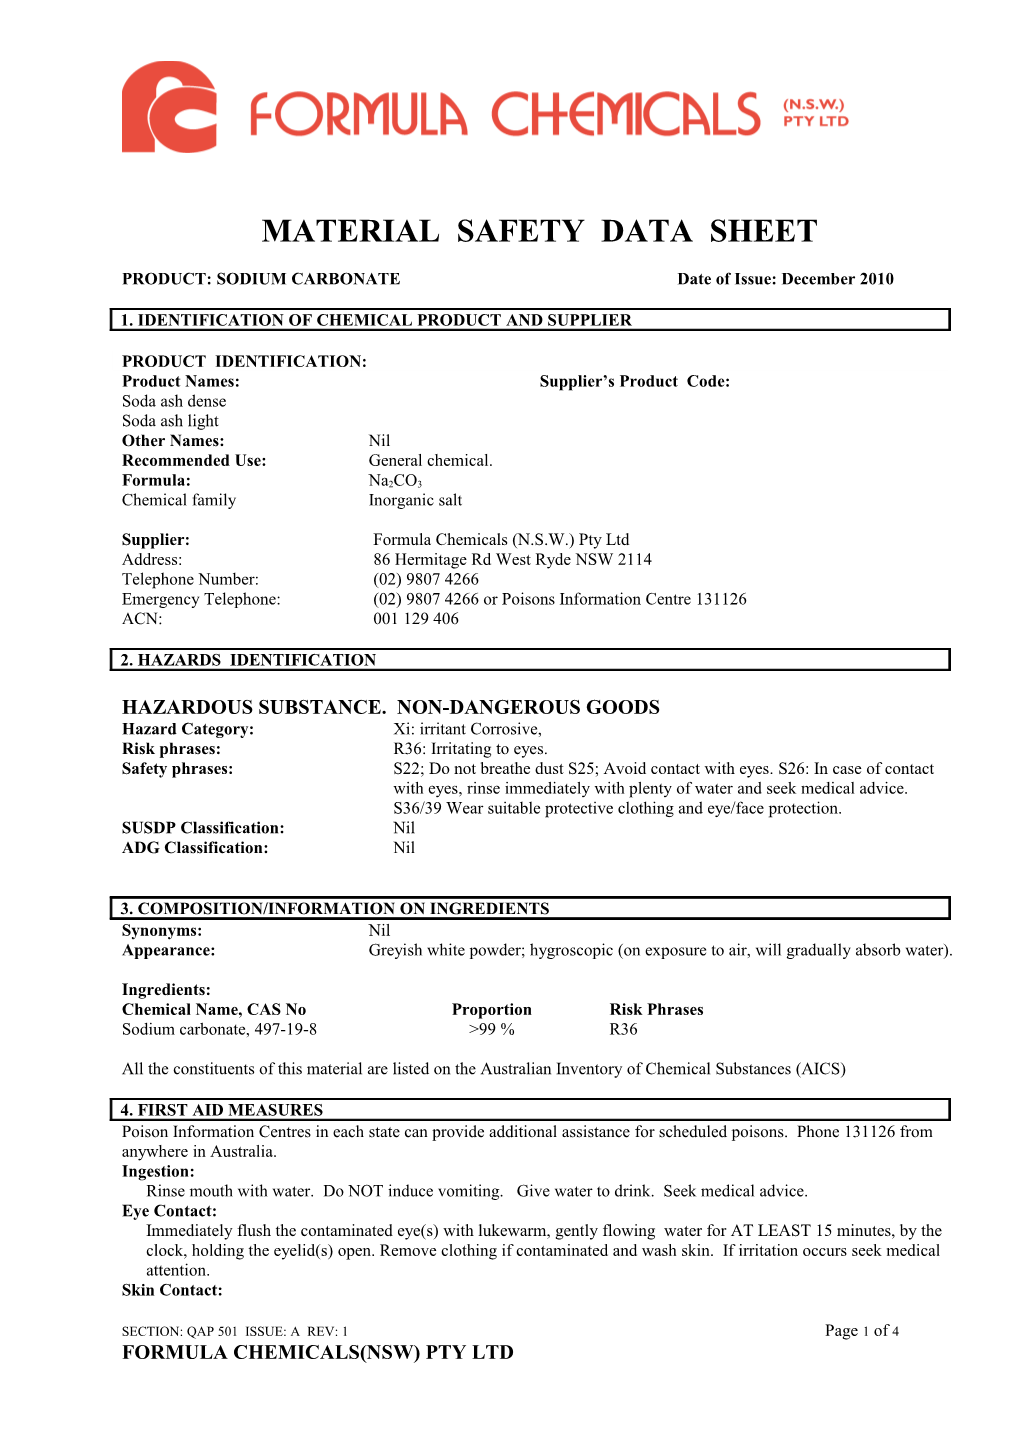 Material Safety Data Sheet s42